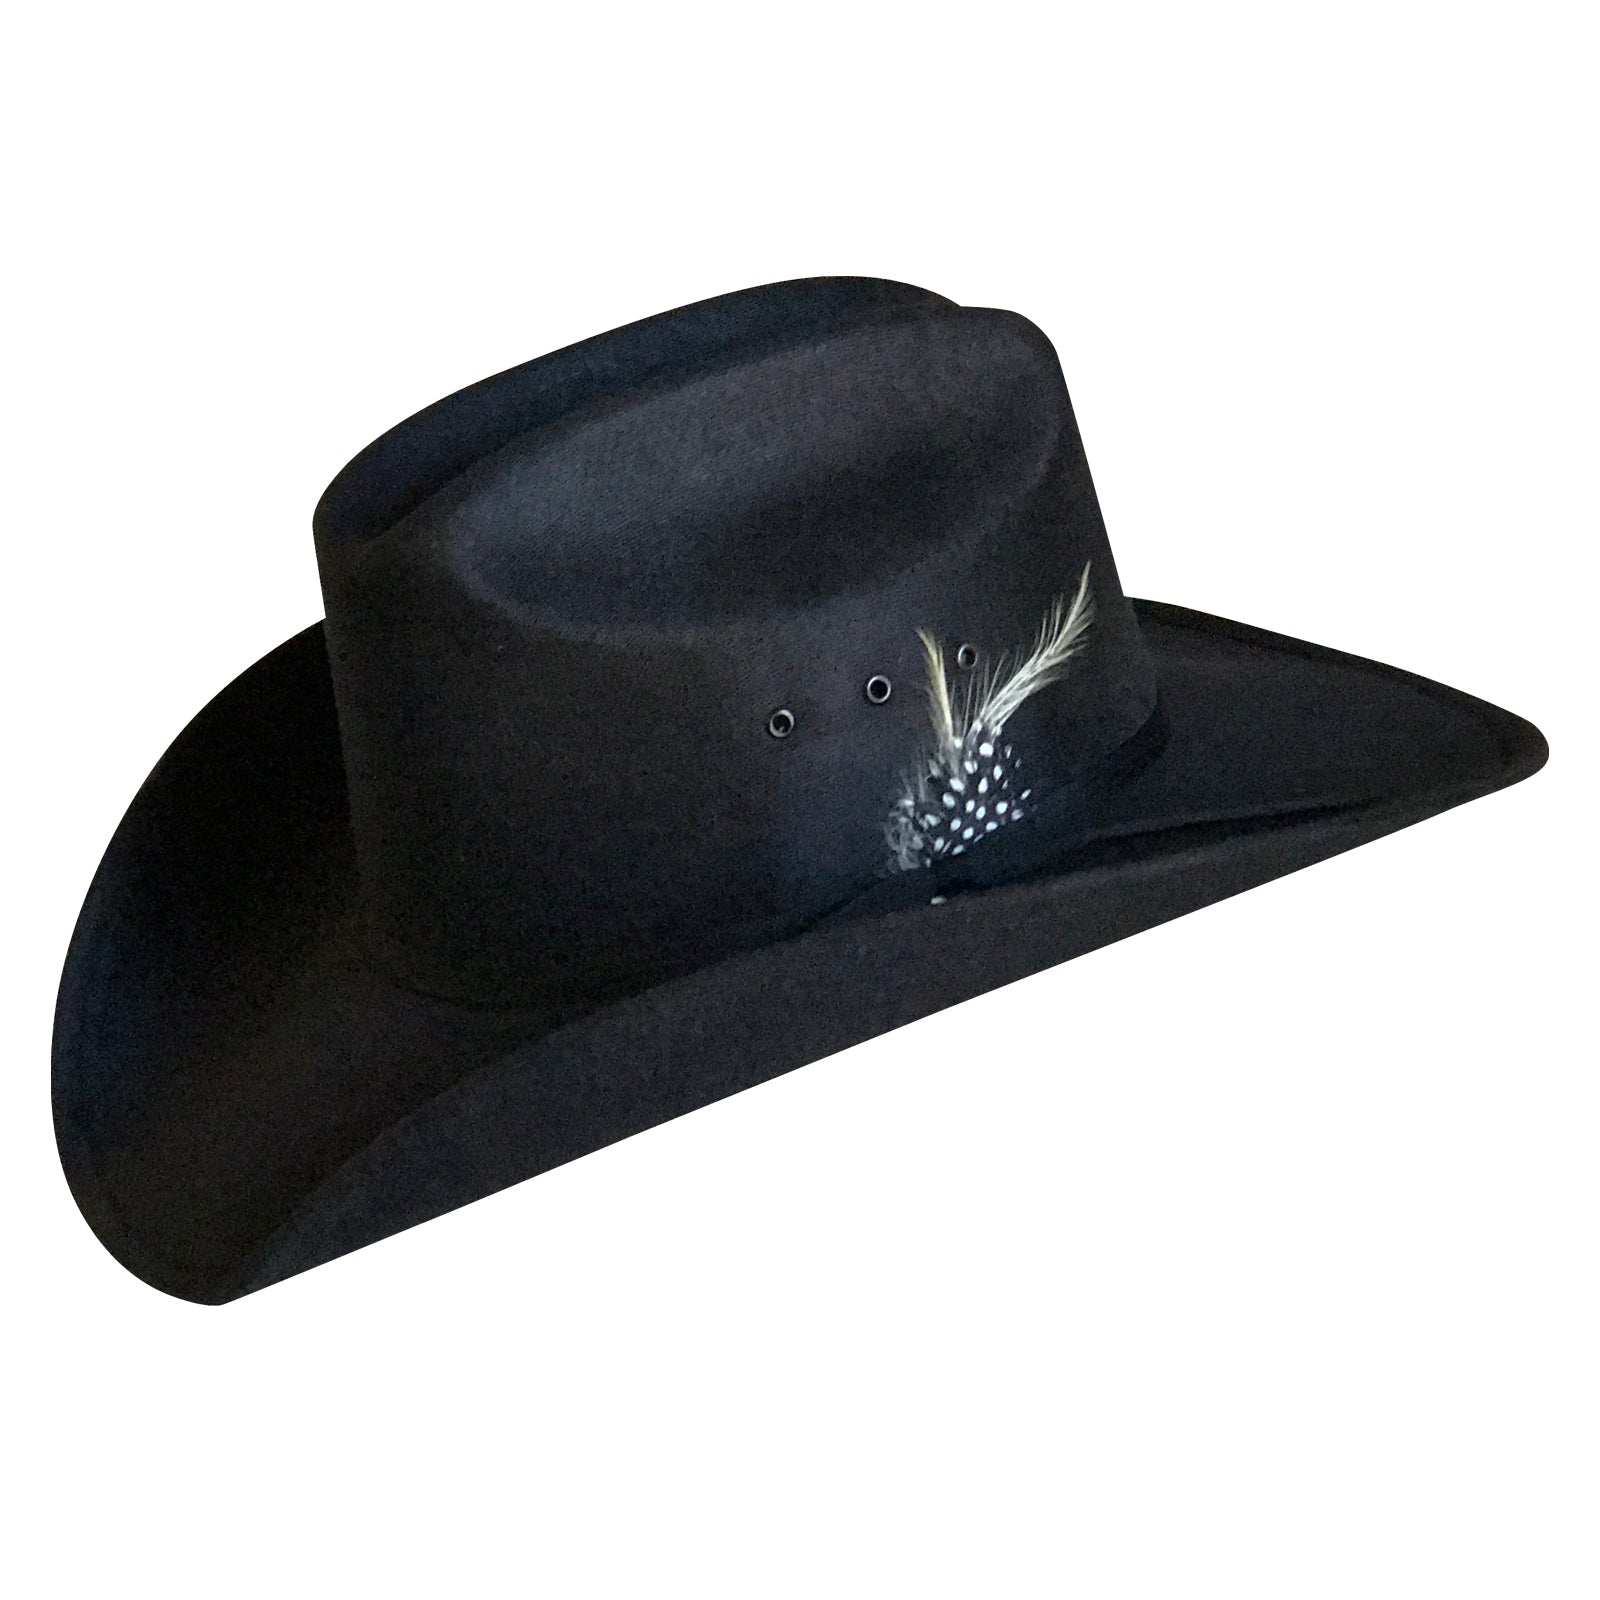 Mens Paramount Outdoors Black Cowboy Western Hat 100% Wool Size 6 7/8